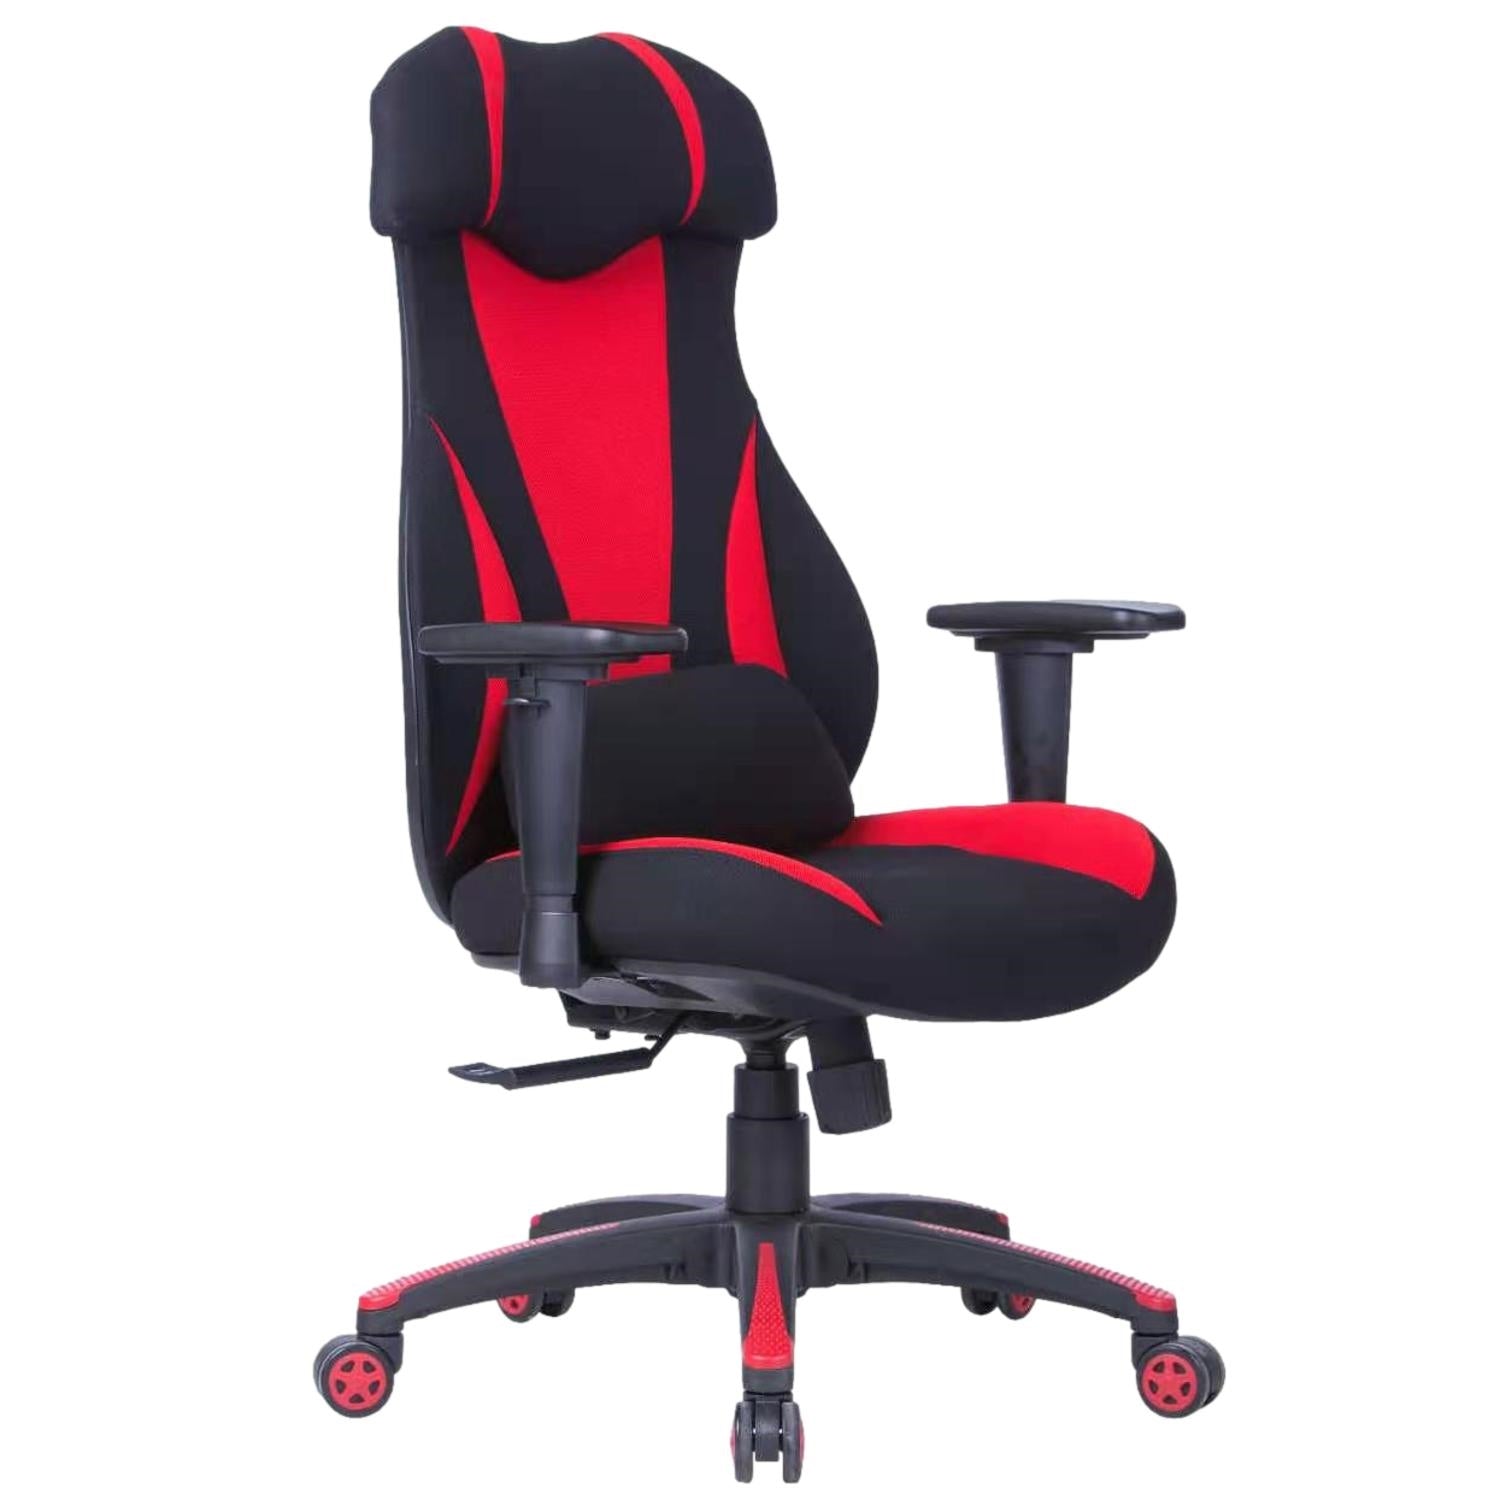 ViscoLogic ARMOUR [Designer Inspired] Premium Grade| Sturdy Foldable Base | Mesh Fabric Home Office Computer Gaming Chair